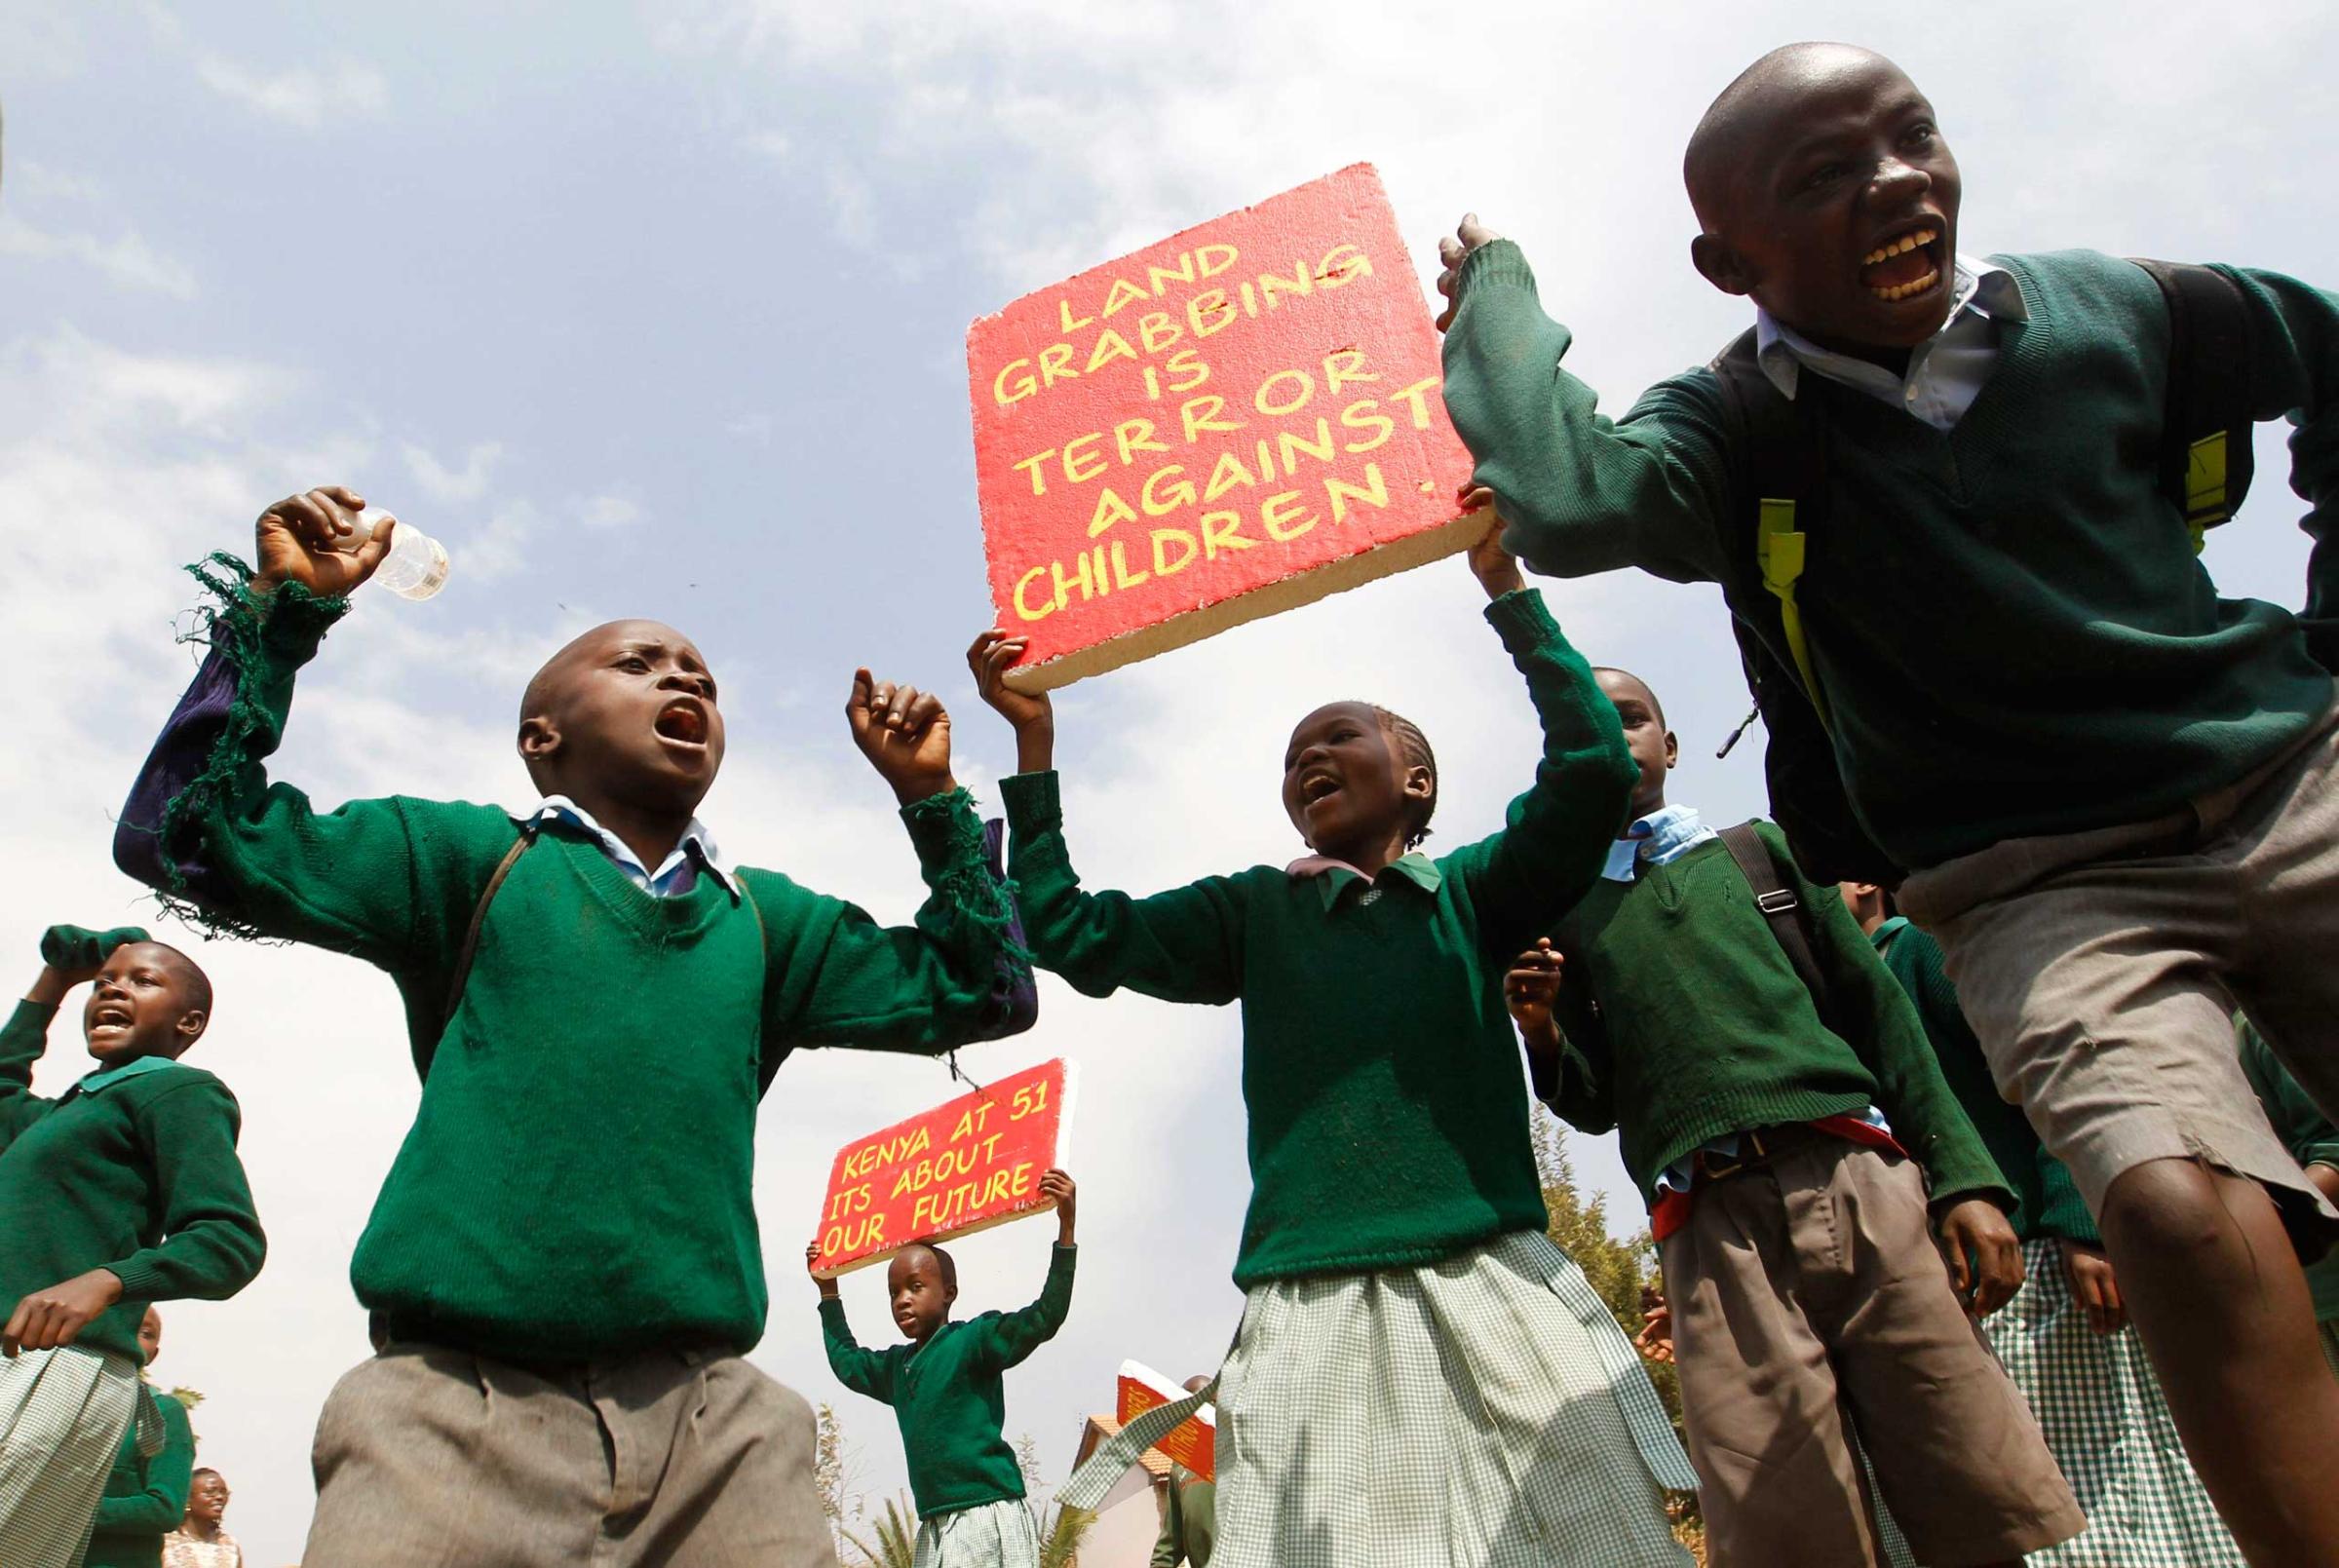 Students from Langata primary school hold placards as they protest against a perimeter wall illegally erected by a private developer around their school playground in Kenya's capital Nairobi, Jan. 19, 2015.